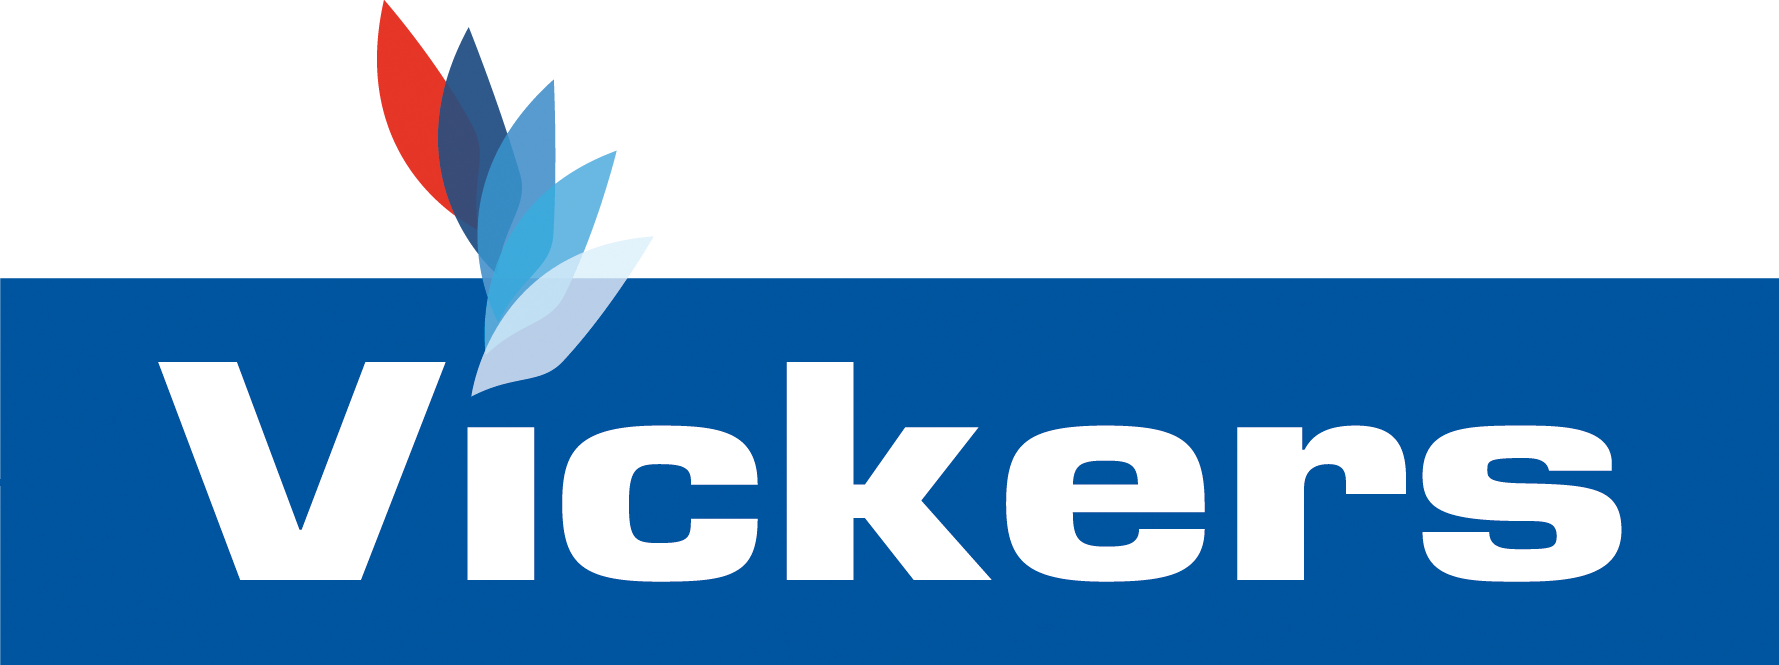 Vickers Logo - Vickers Energy Management System